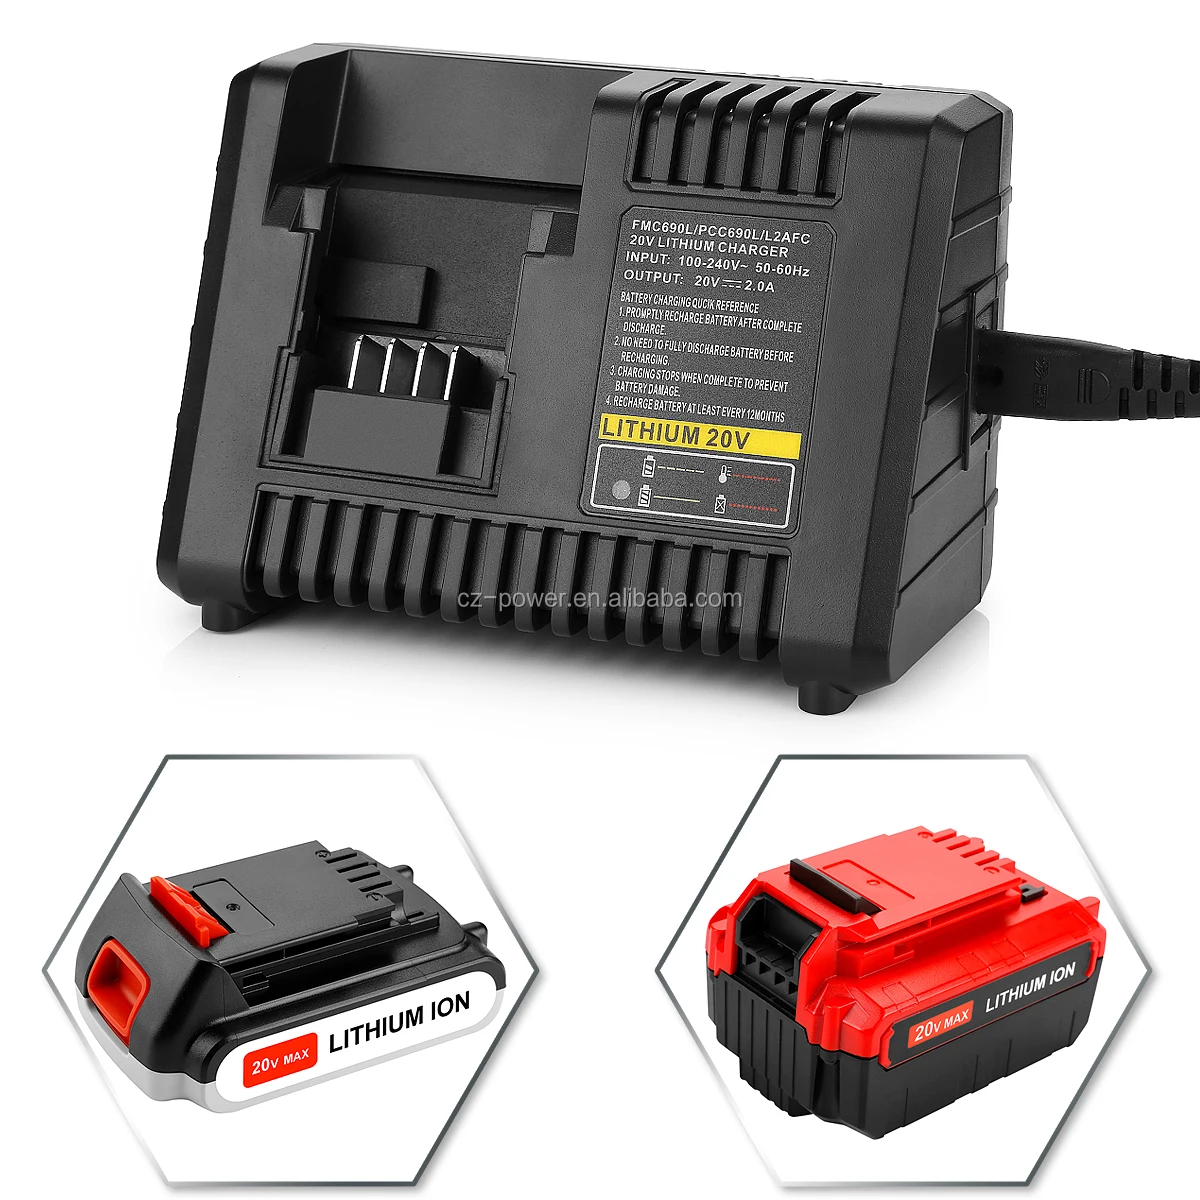 FMC690L/PCC690L 10.8V to 18V 3A Power tool Lithium Ion battery Charger For  Porter Cable and Black Decker